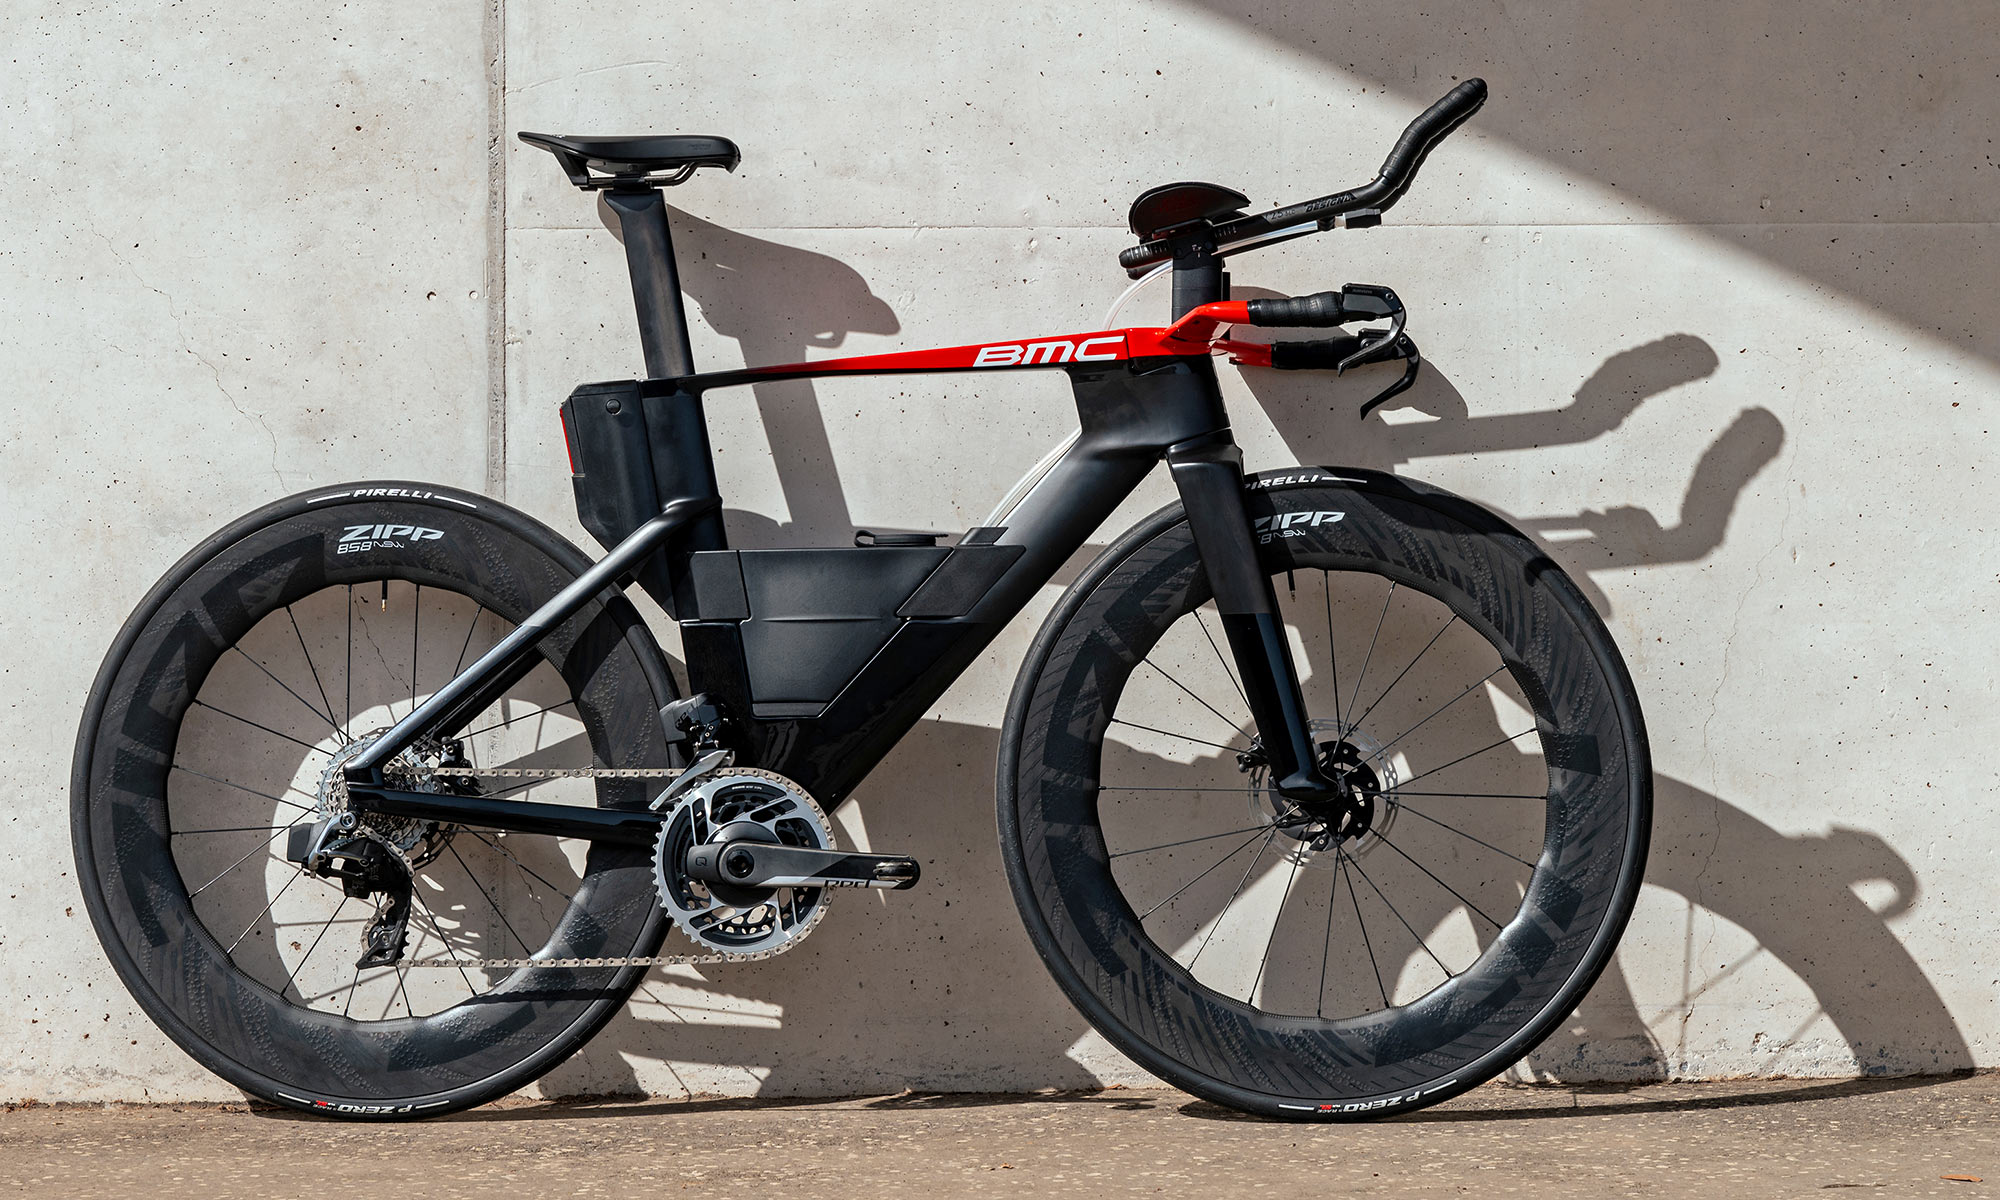 All-new BMC Speedmachine all-new time-trial triathlon bike developed with Red Bull F1